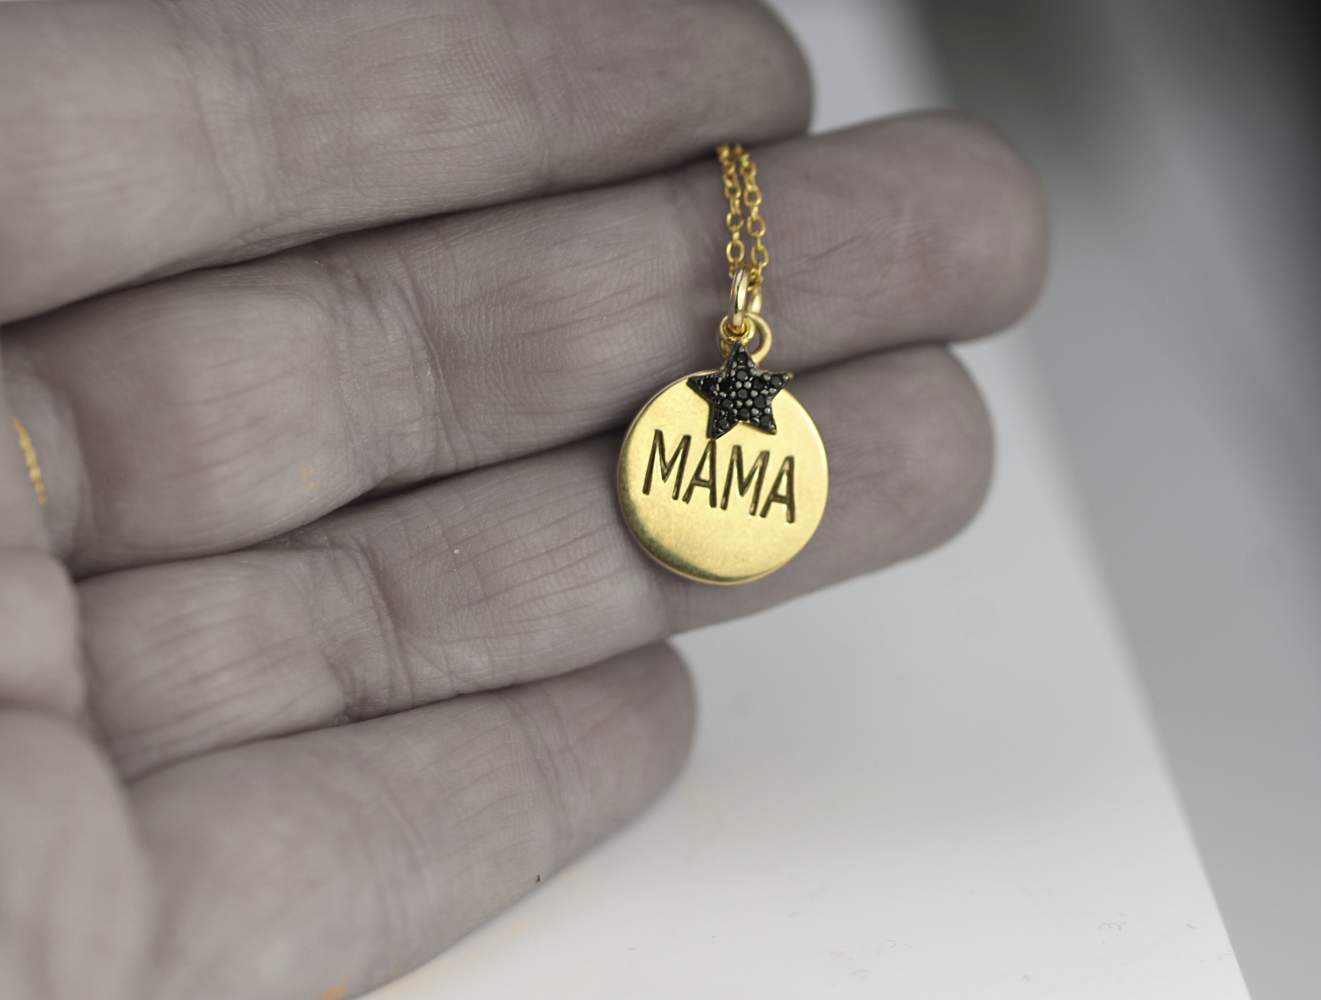 Golden engraved mama pendant with black cubic zirconia star.